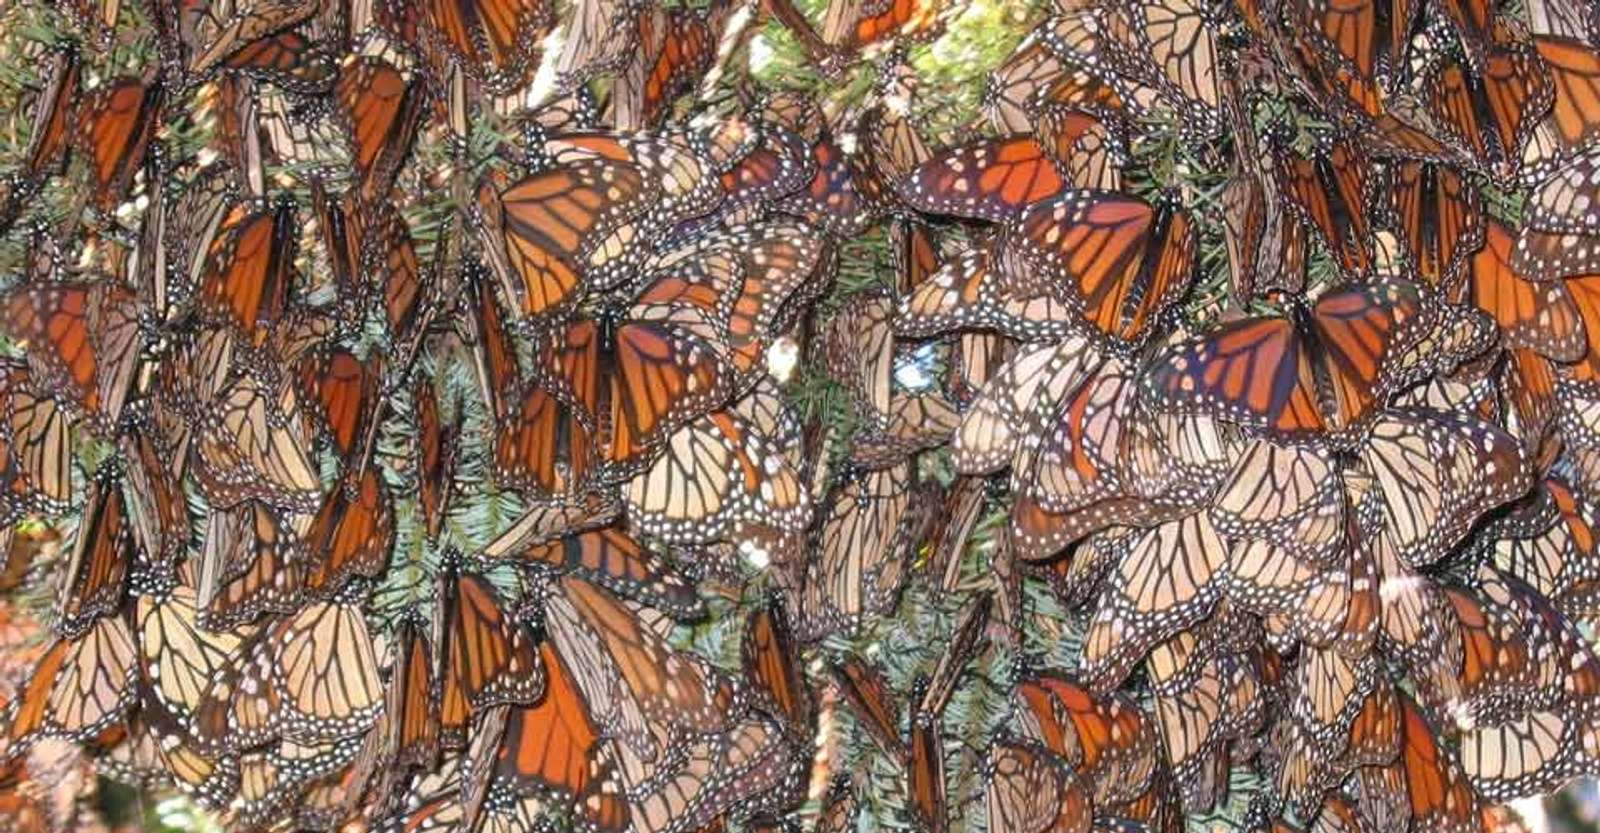 Monarch butterflies, El Rosario Butterfly Sanctuary, Angangueo, Mexico.